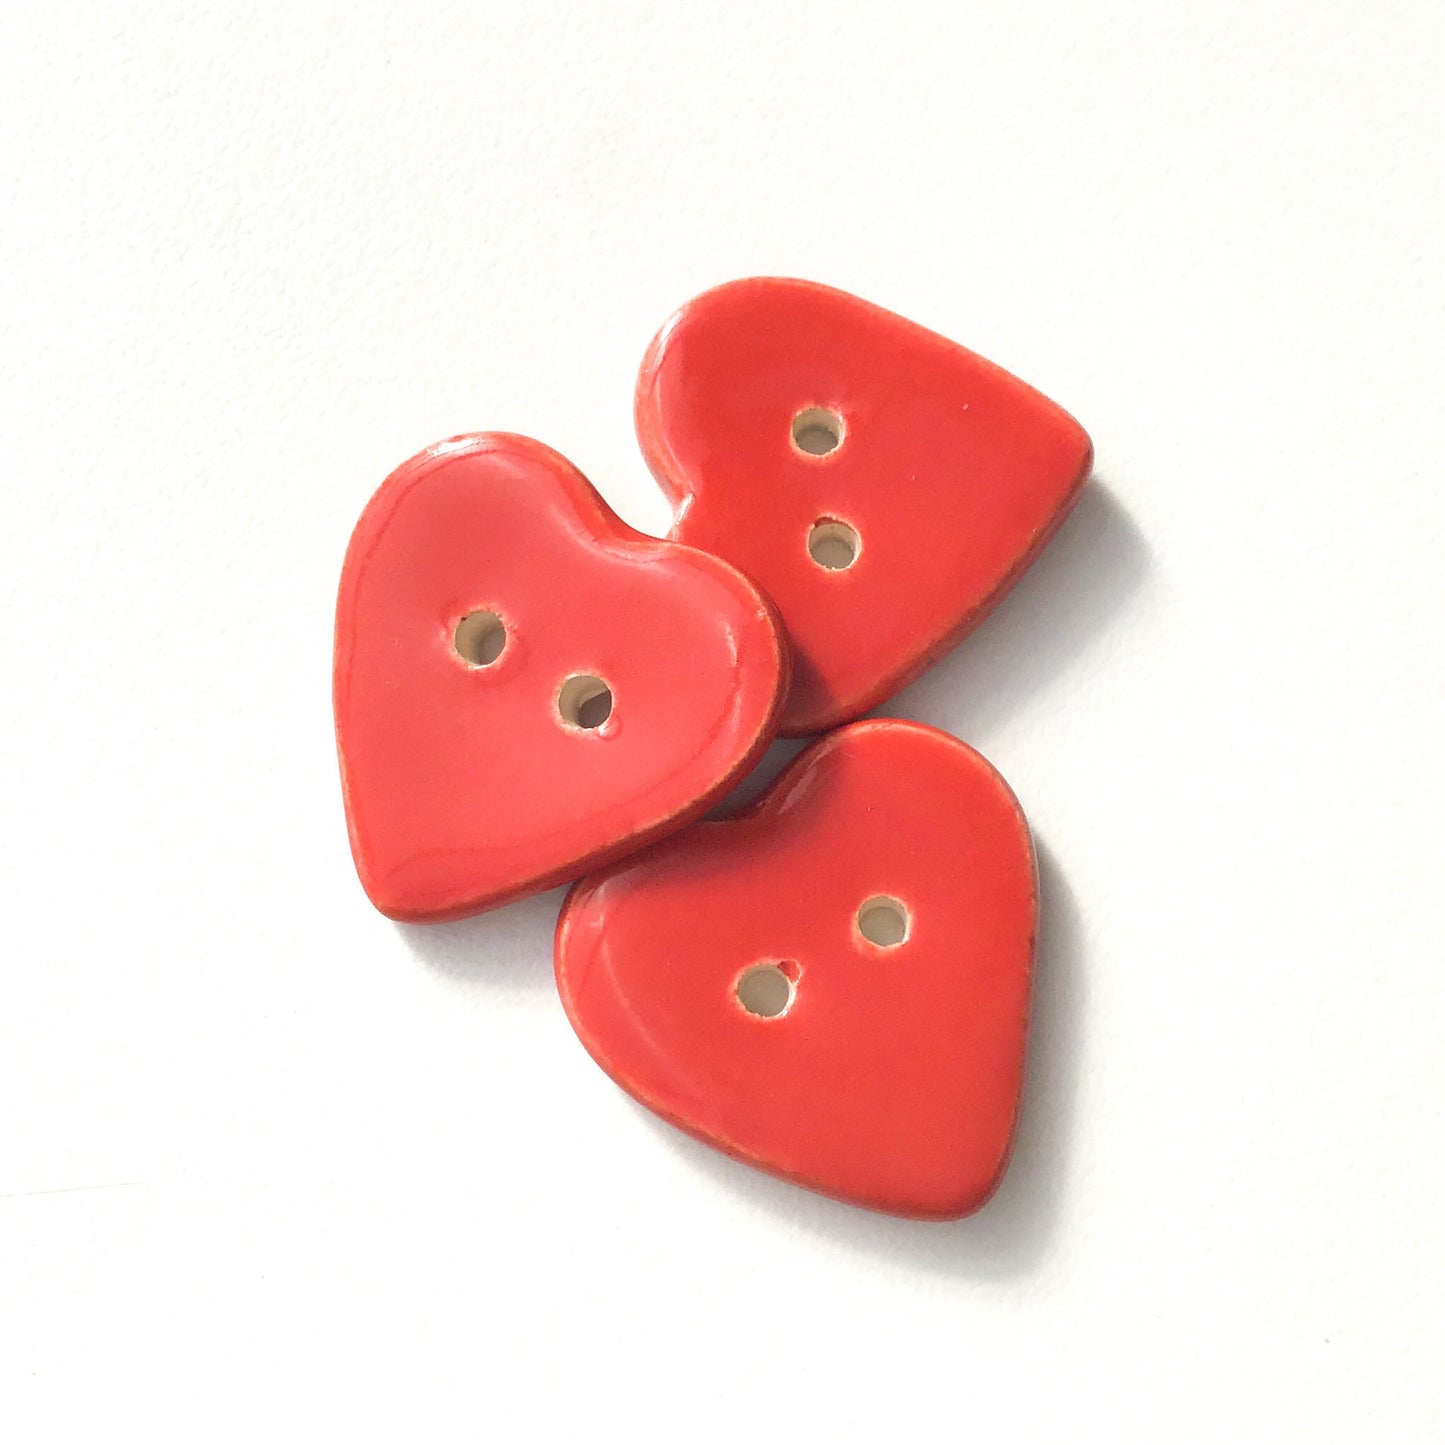 Bright Red Heart Buttons - Ceramic Heart Buttons - 7/8" (ws-15)